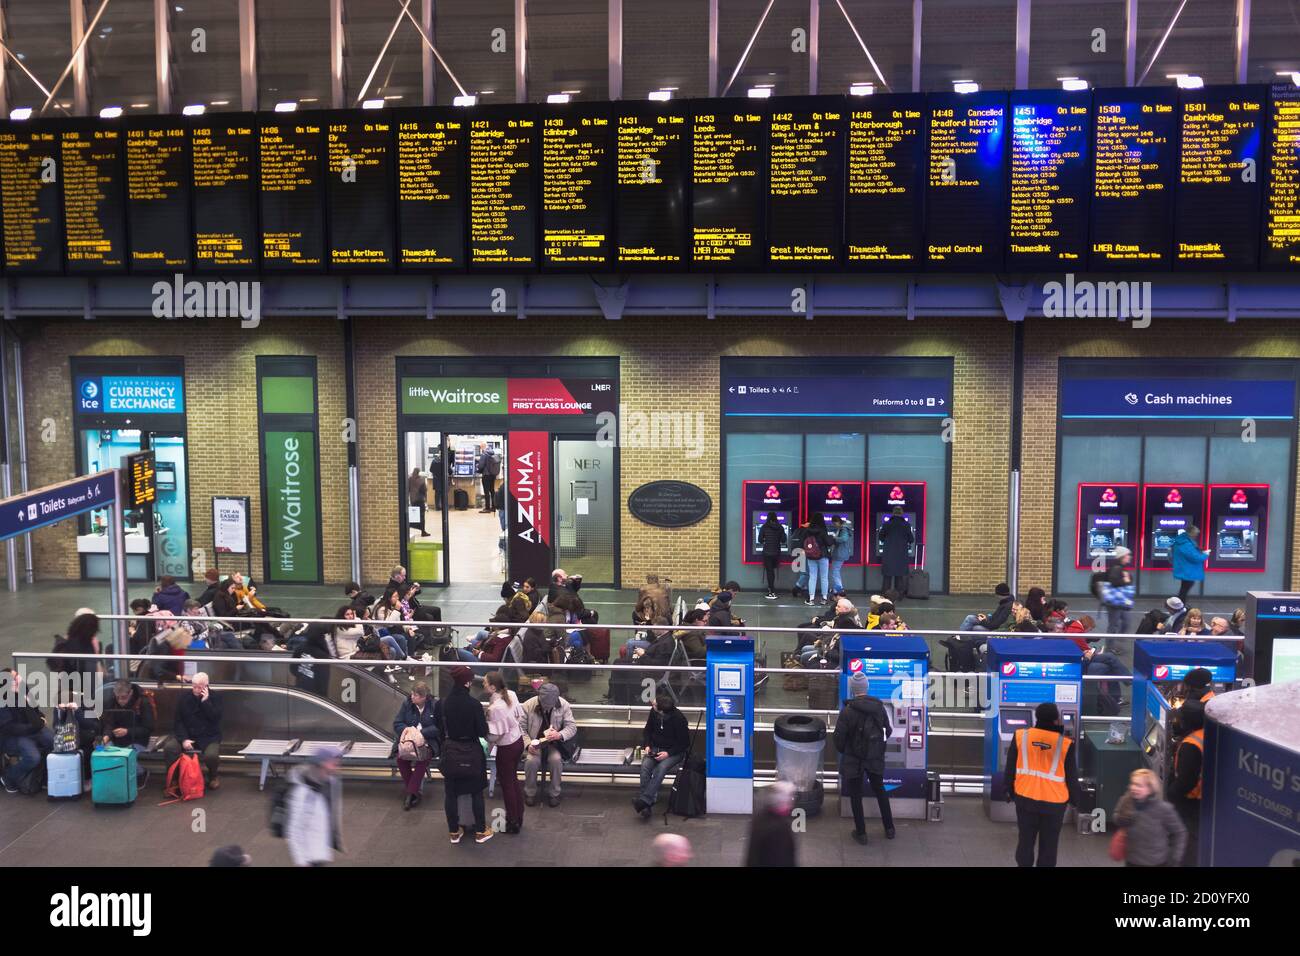 dh Railway terminus KINGS CROSS STATION LONDON Concourse boards departure board people passengers england uk Stock Photo